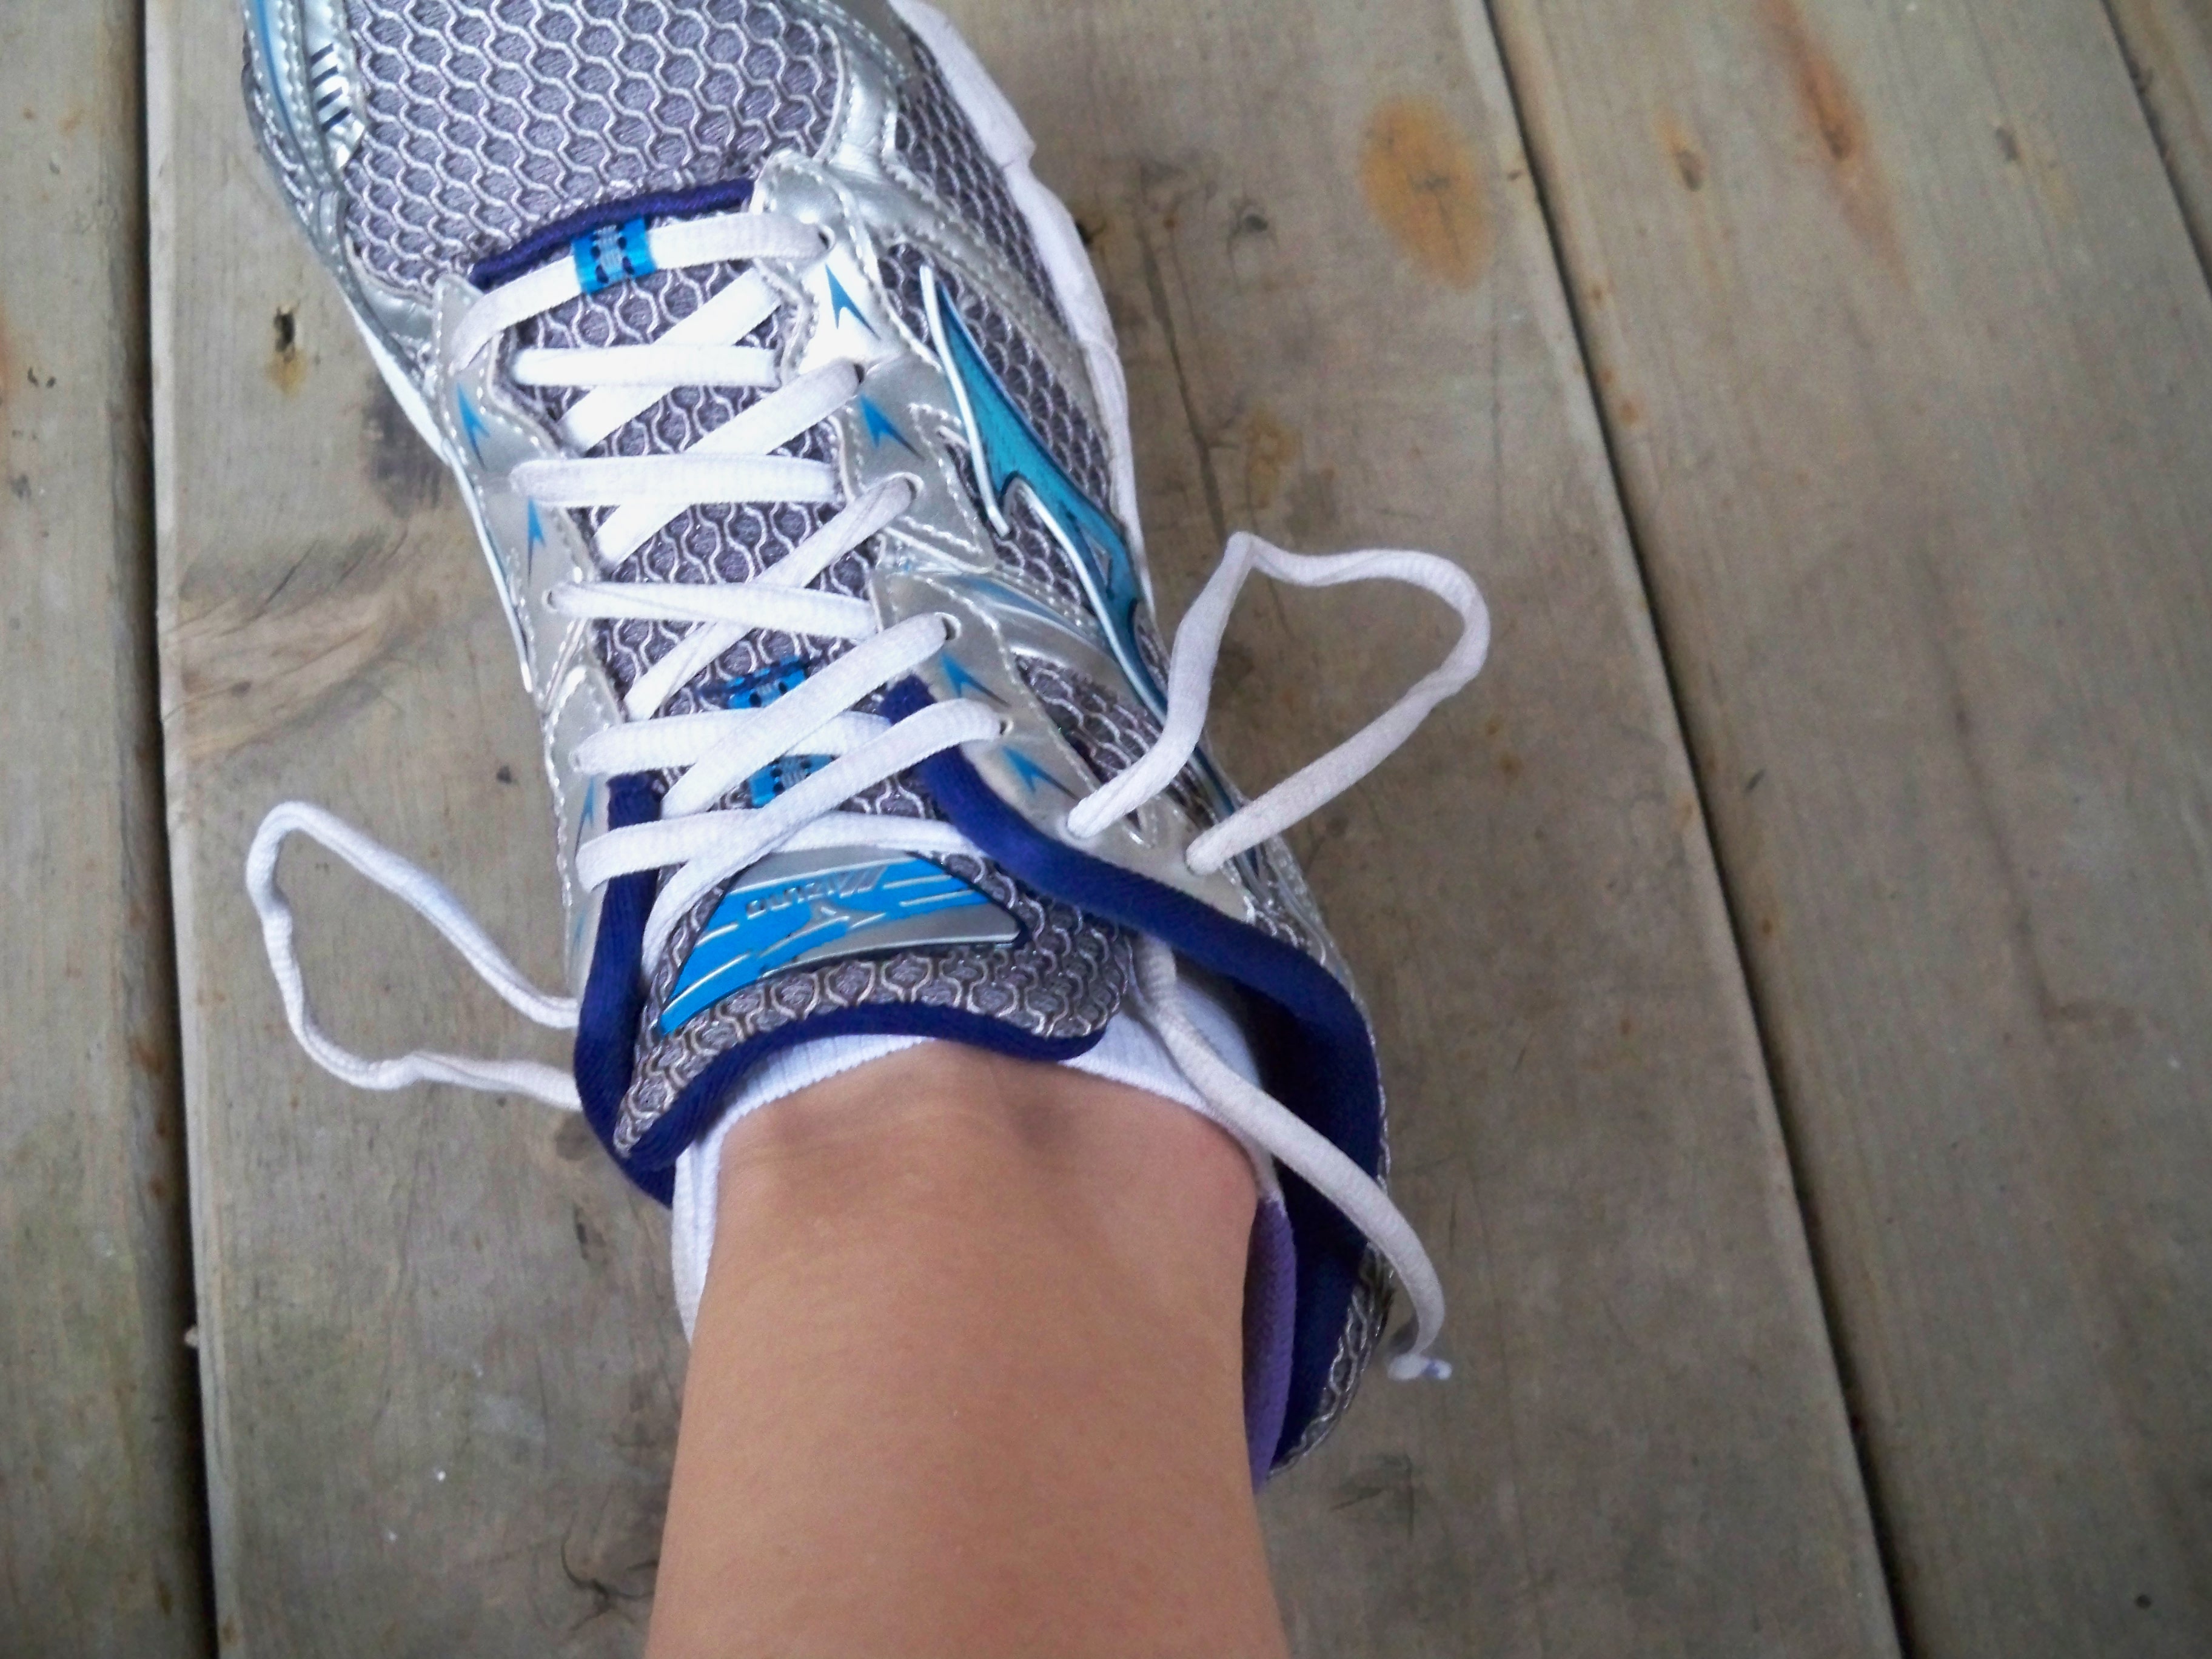 runners shoelace knot